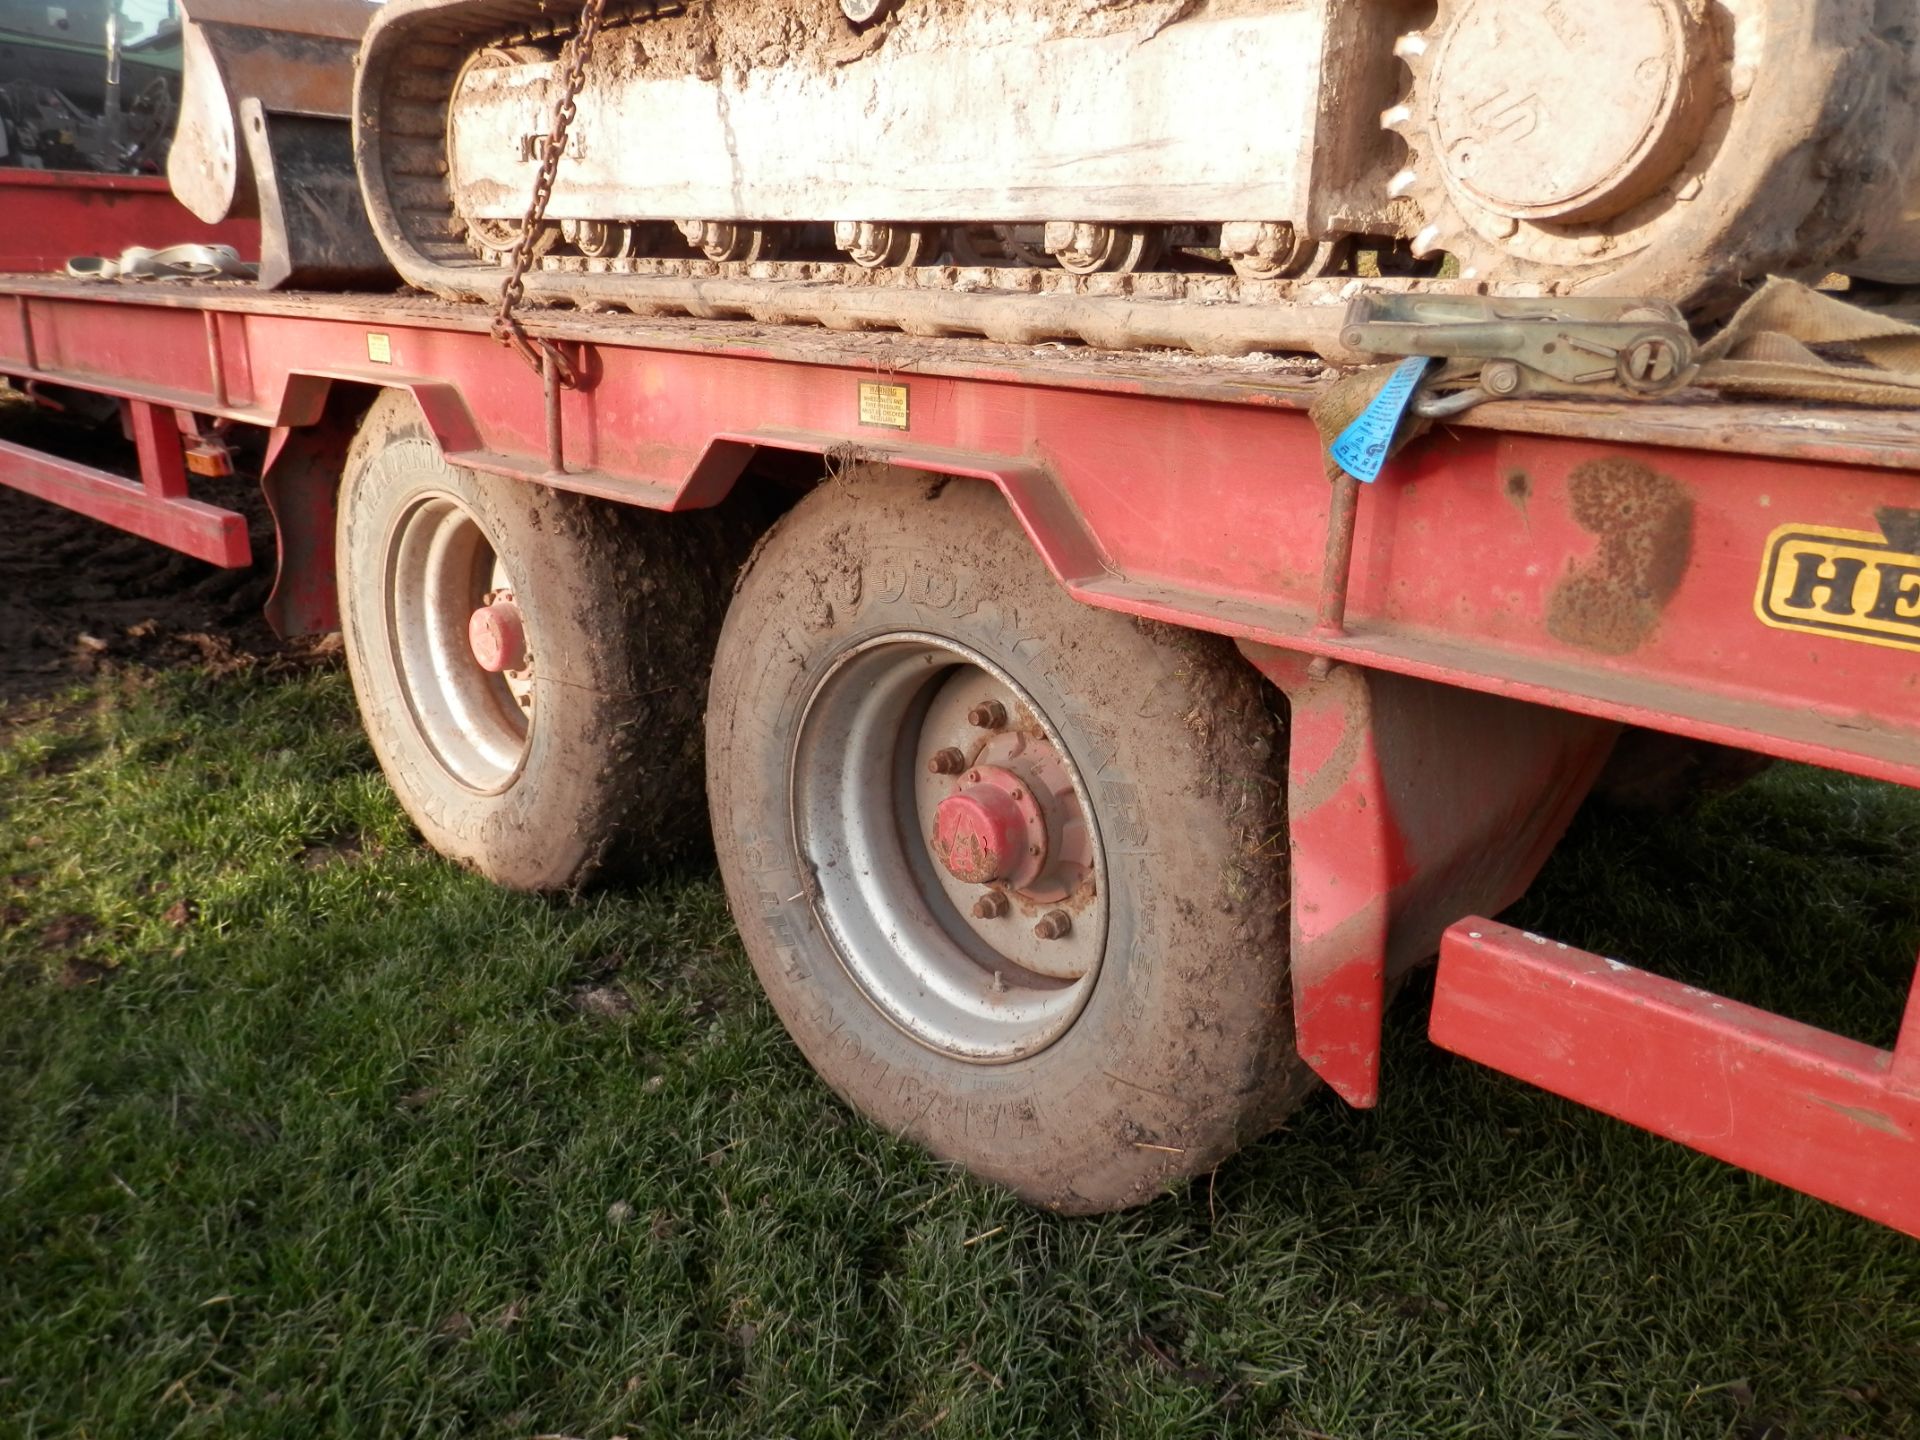 18 TONNE HERBST PLANT TRAILER, TWIN AXLE. 2010. TRAILER ONLY !! - Image 3 of 5